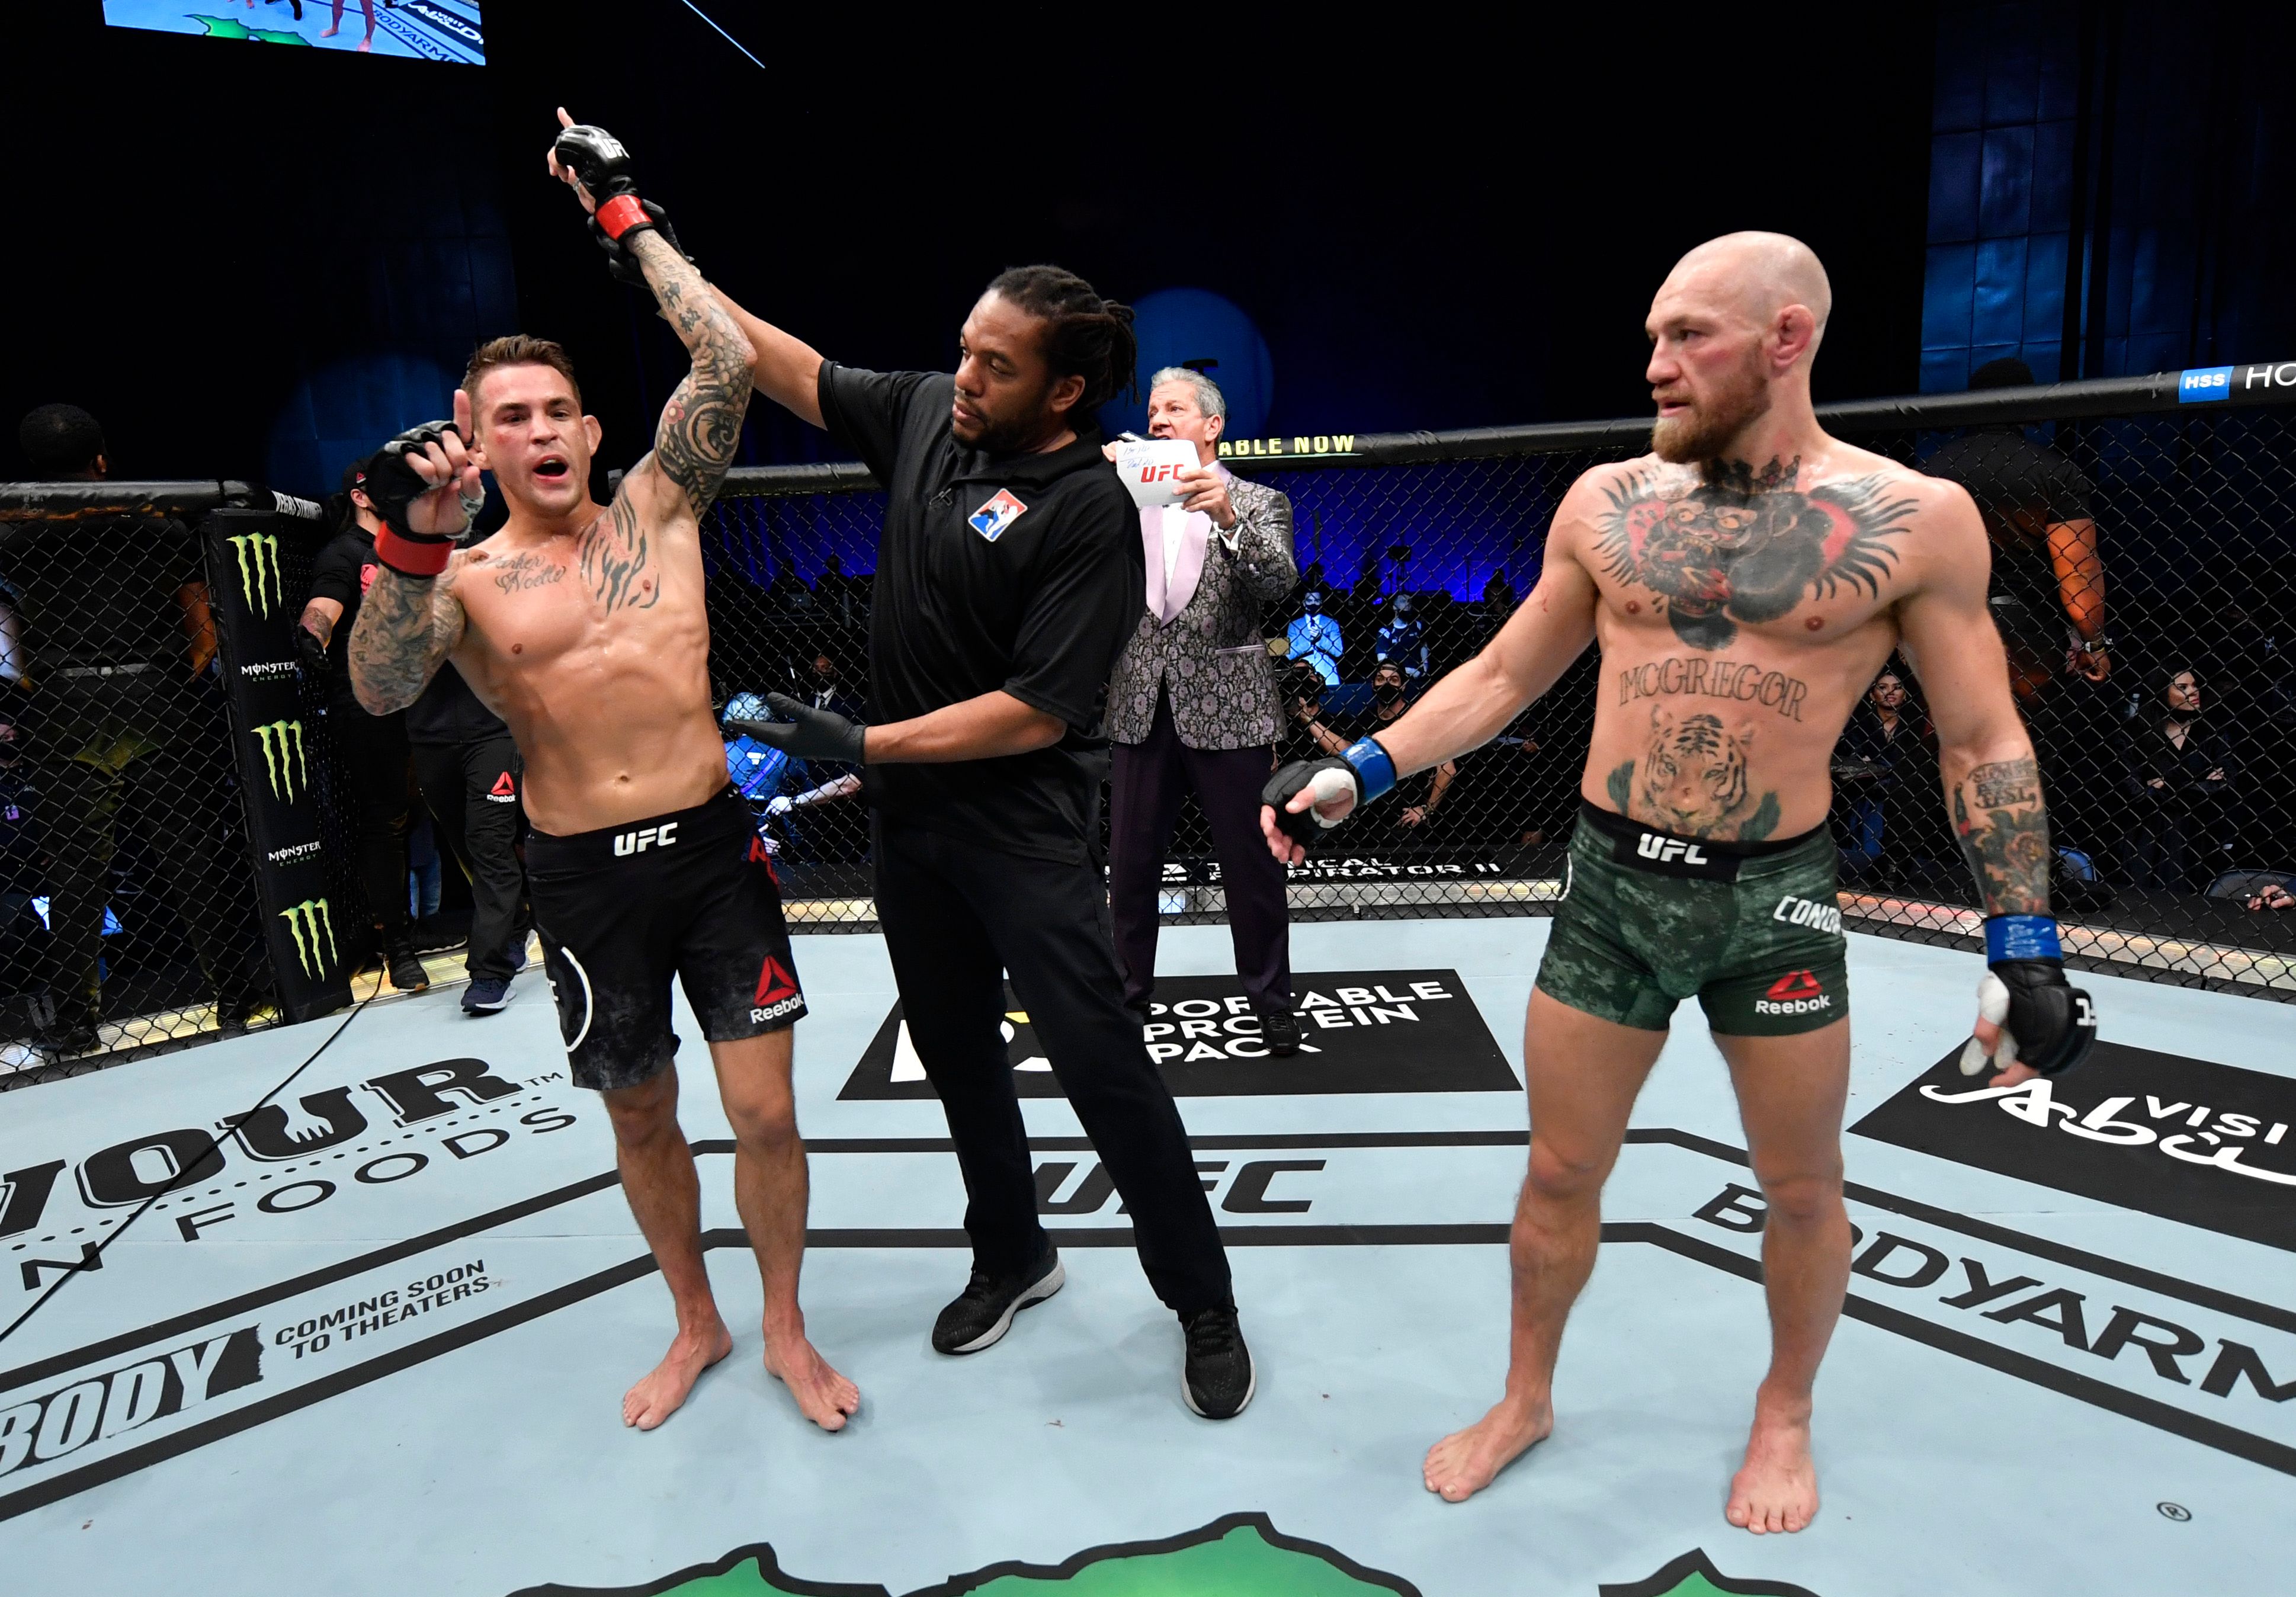 Dustin Poirier knocked out Conor McGregor in their most recent fight.